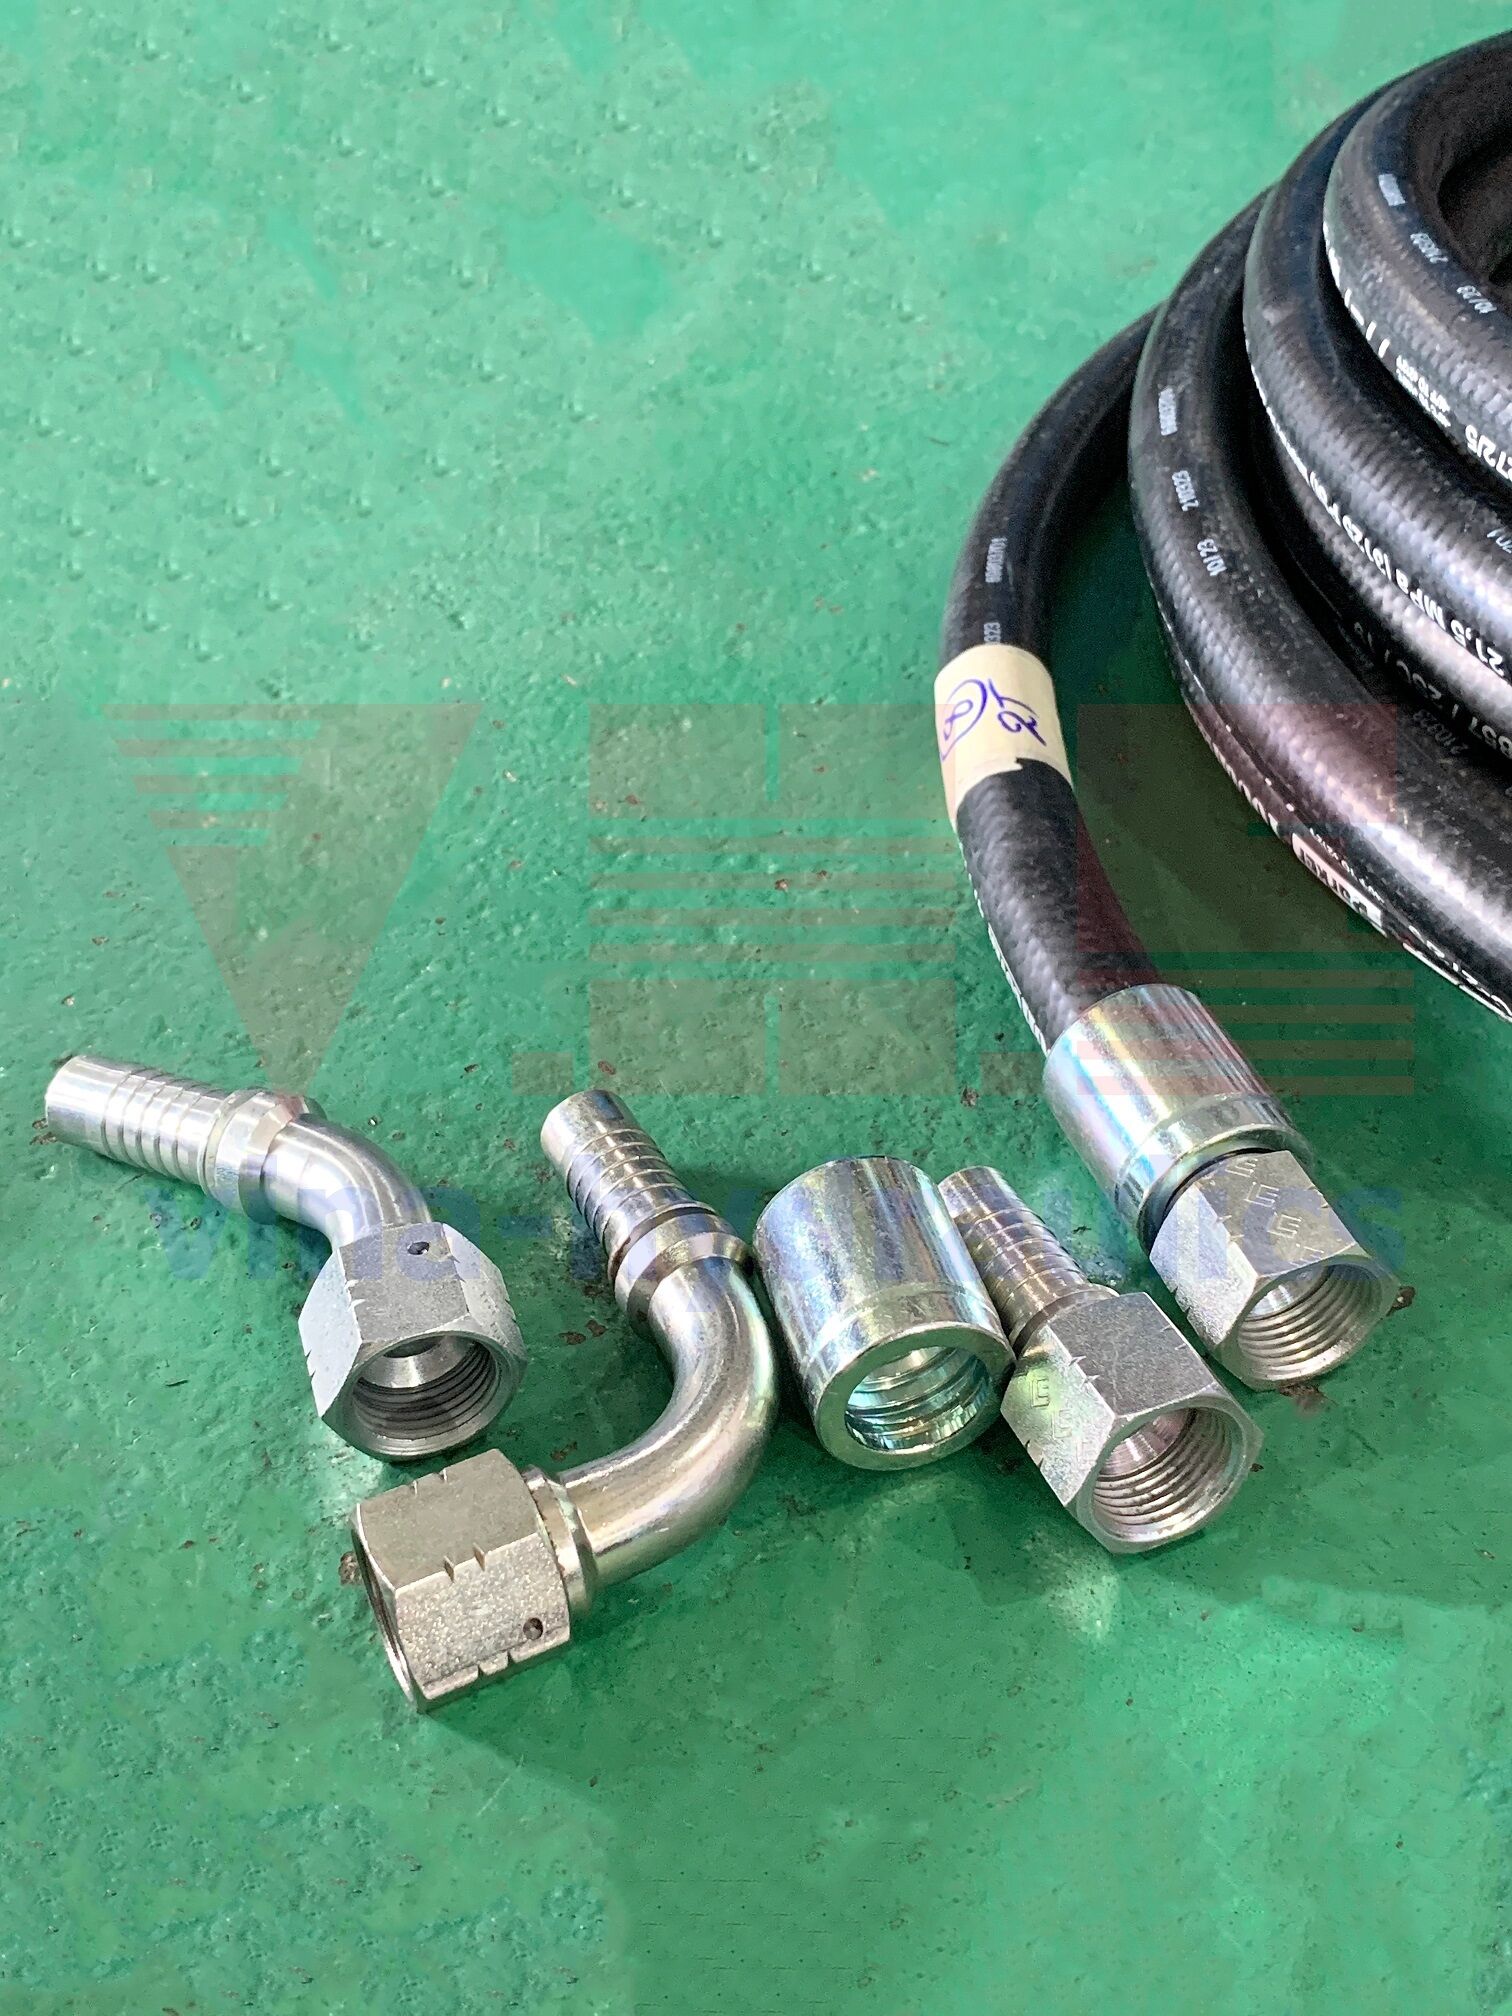 hydraulic pipe pressing services in Ho Chi Minh.